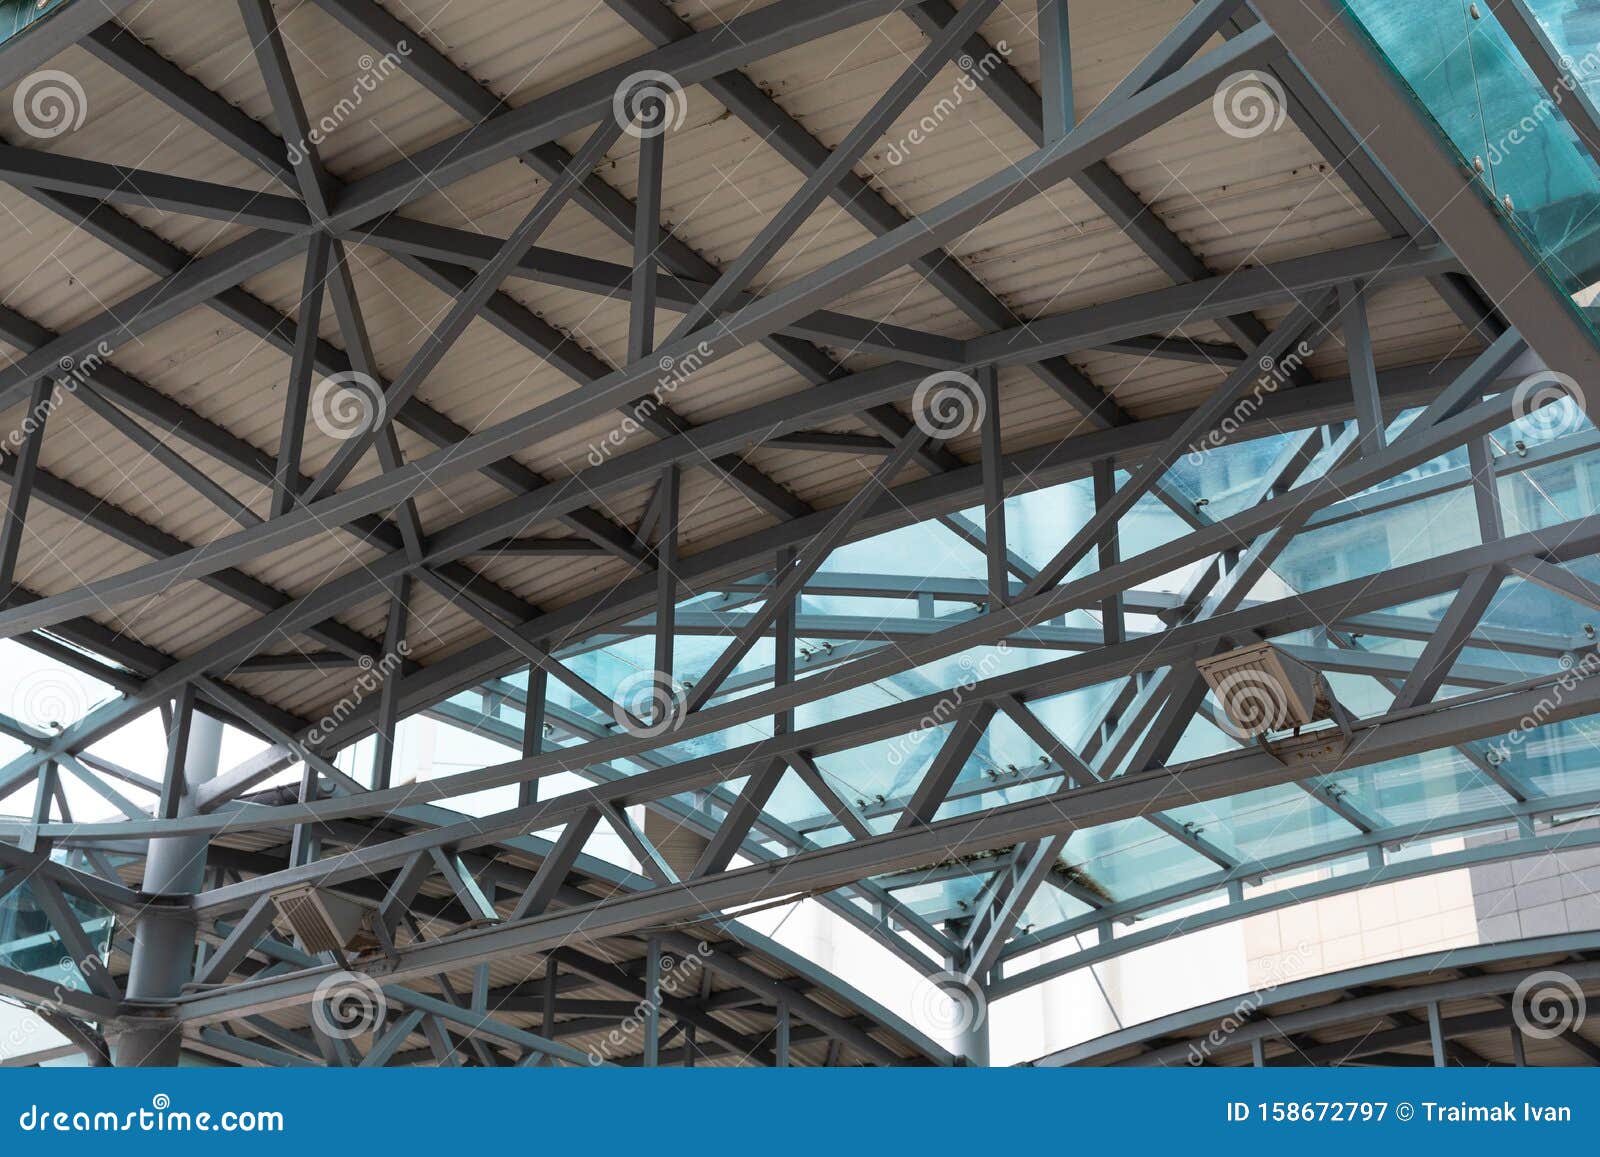 modern awning or velarium for open air performances, roof construction